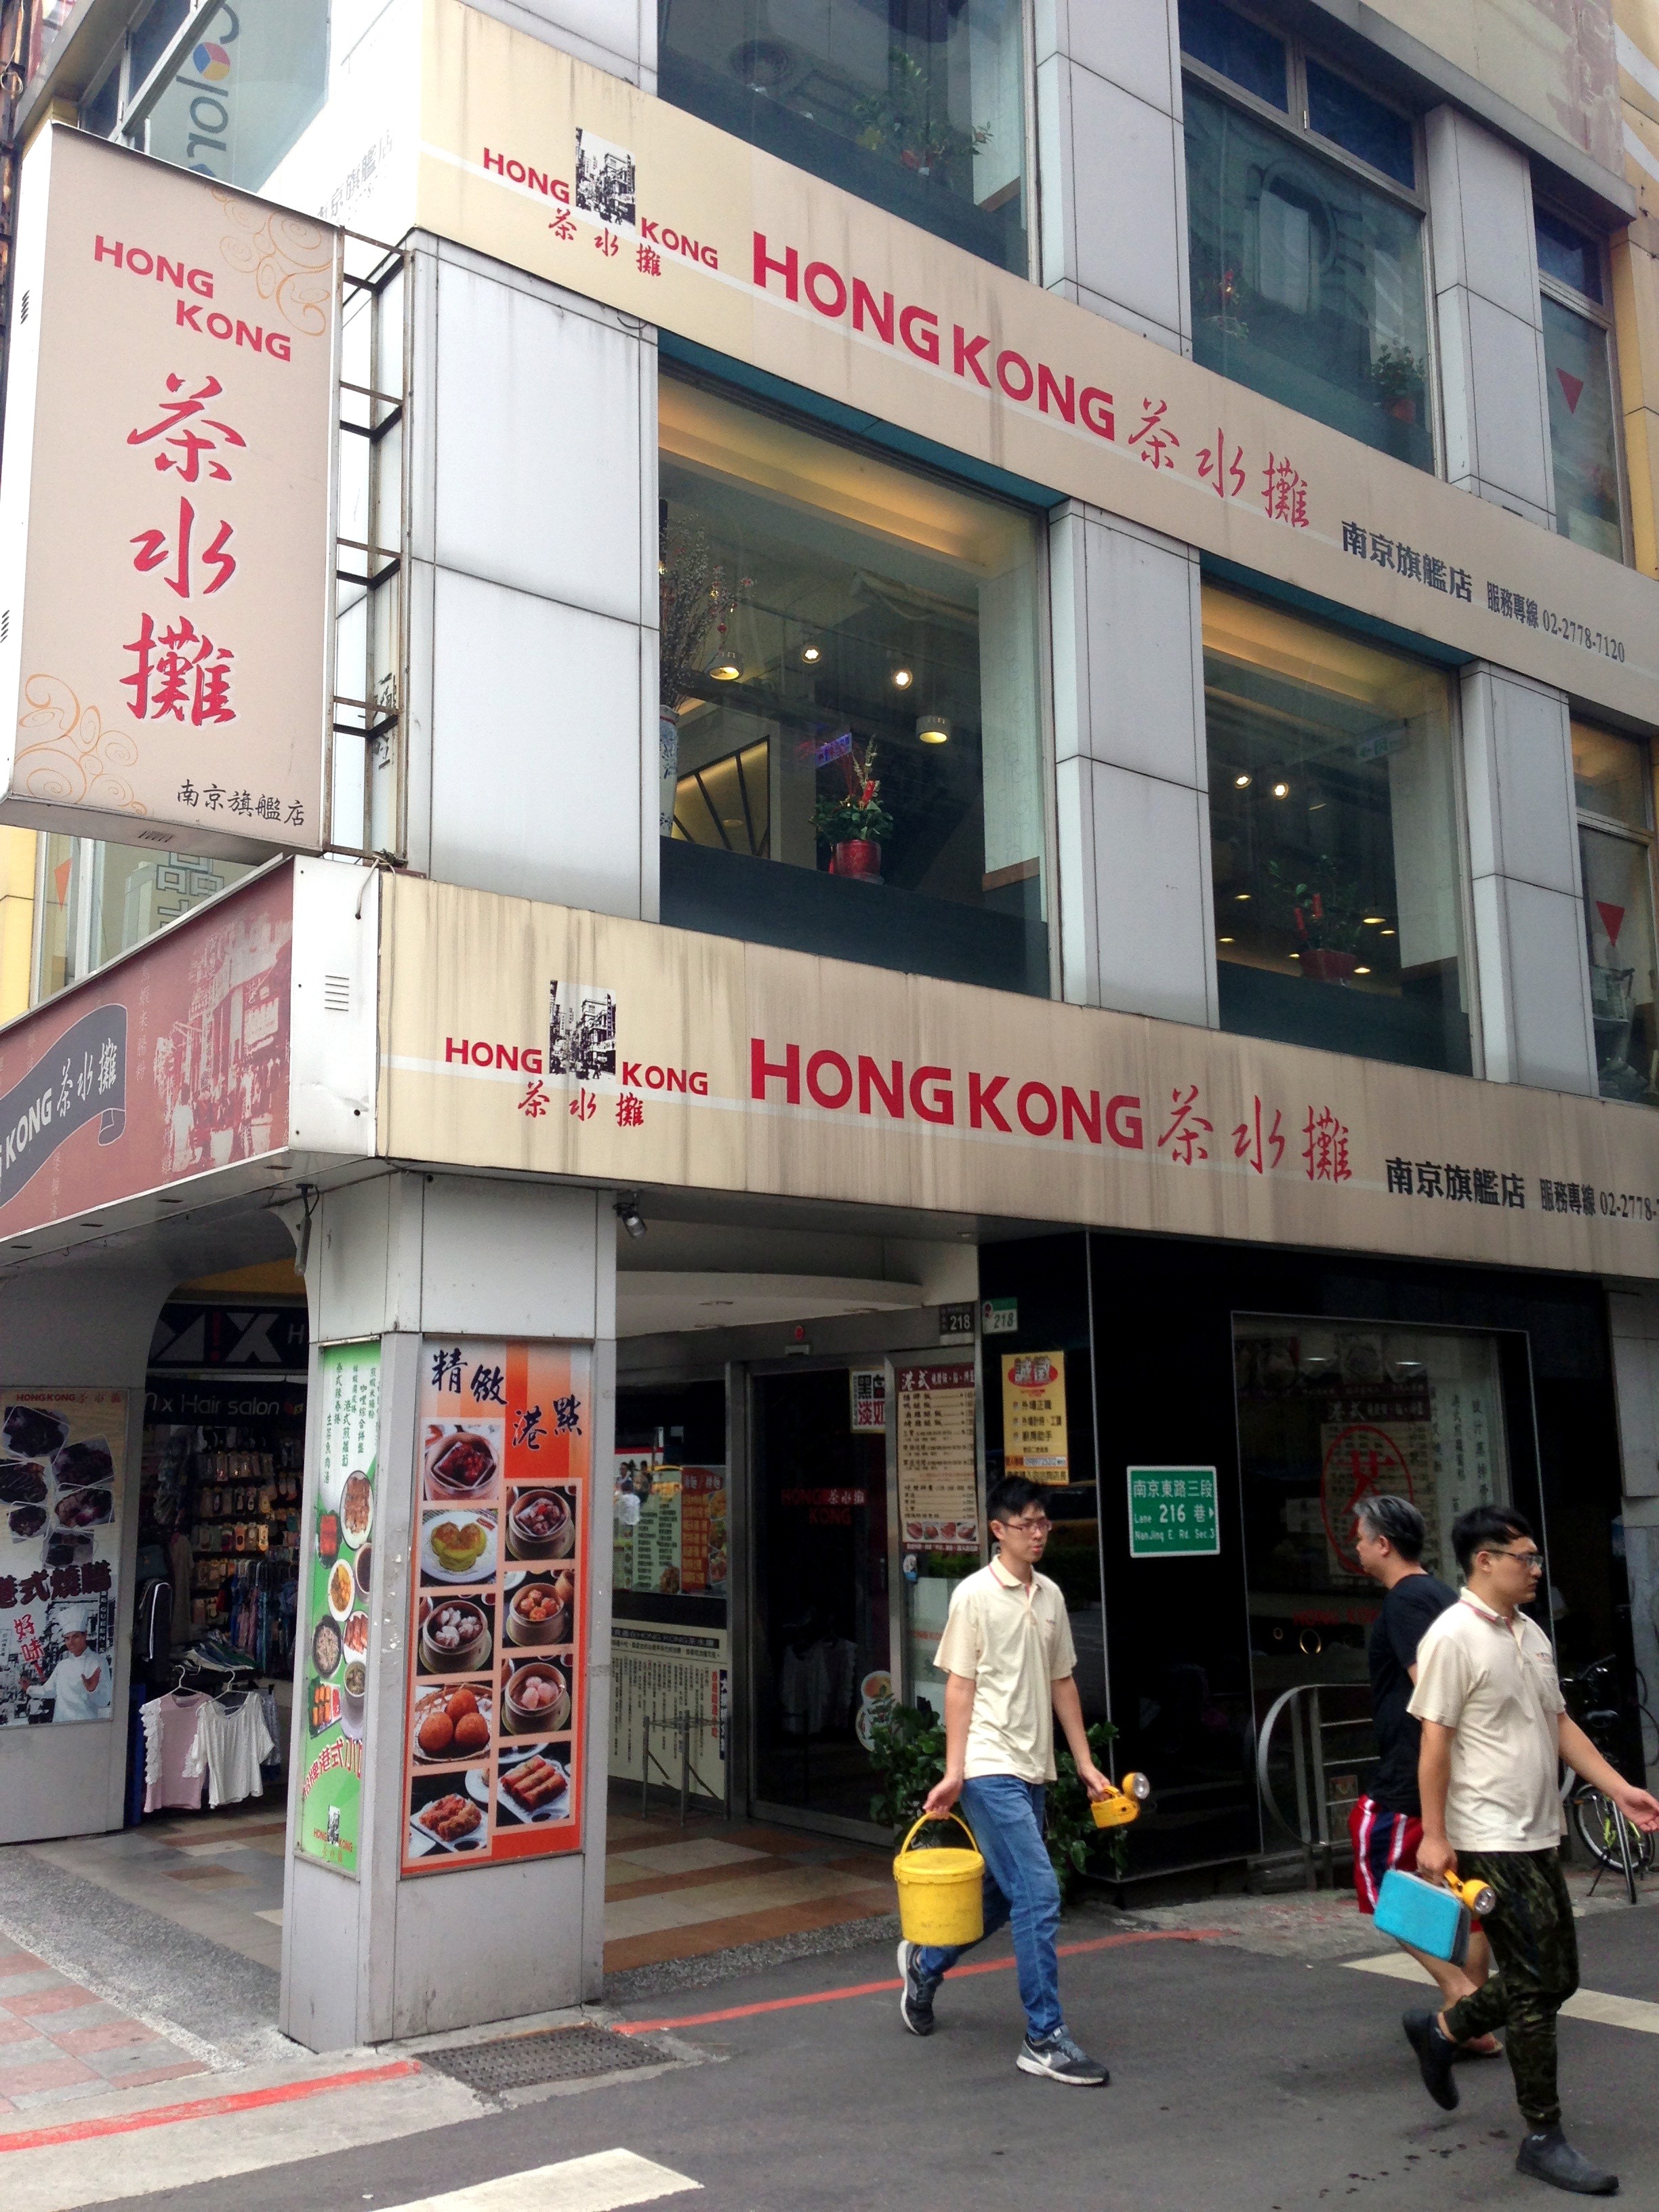 Hong Kong, a cha chaan teng-style restaurant business, started by Michael Lee in Taipei in 1999. Photo: Handout